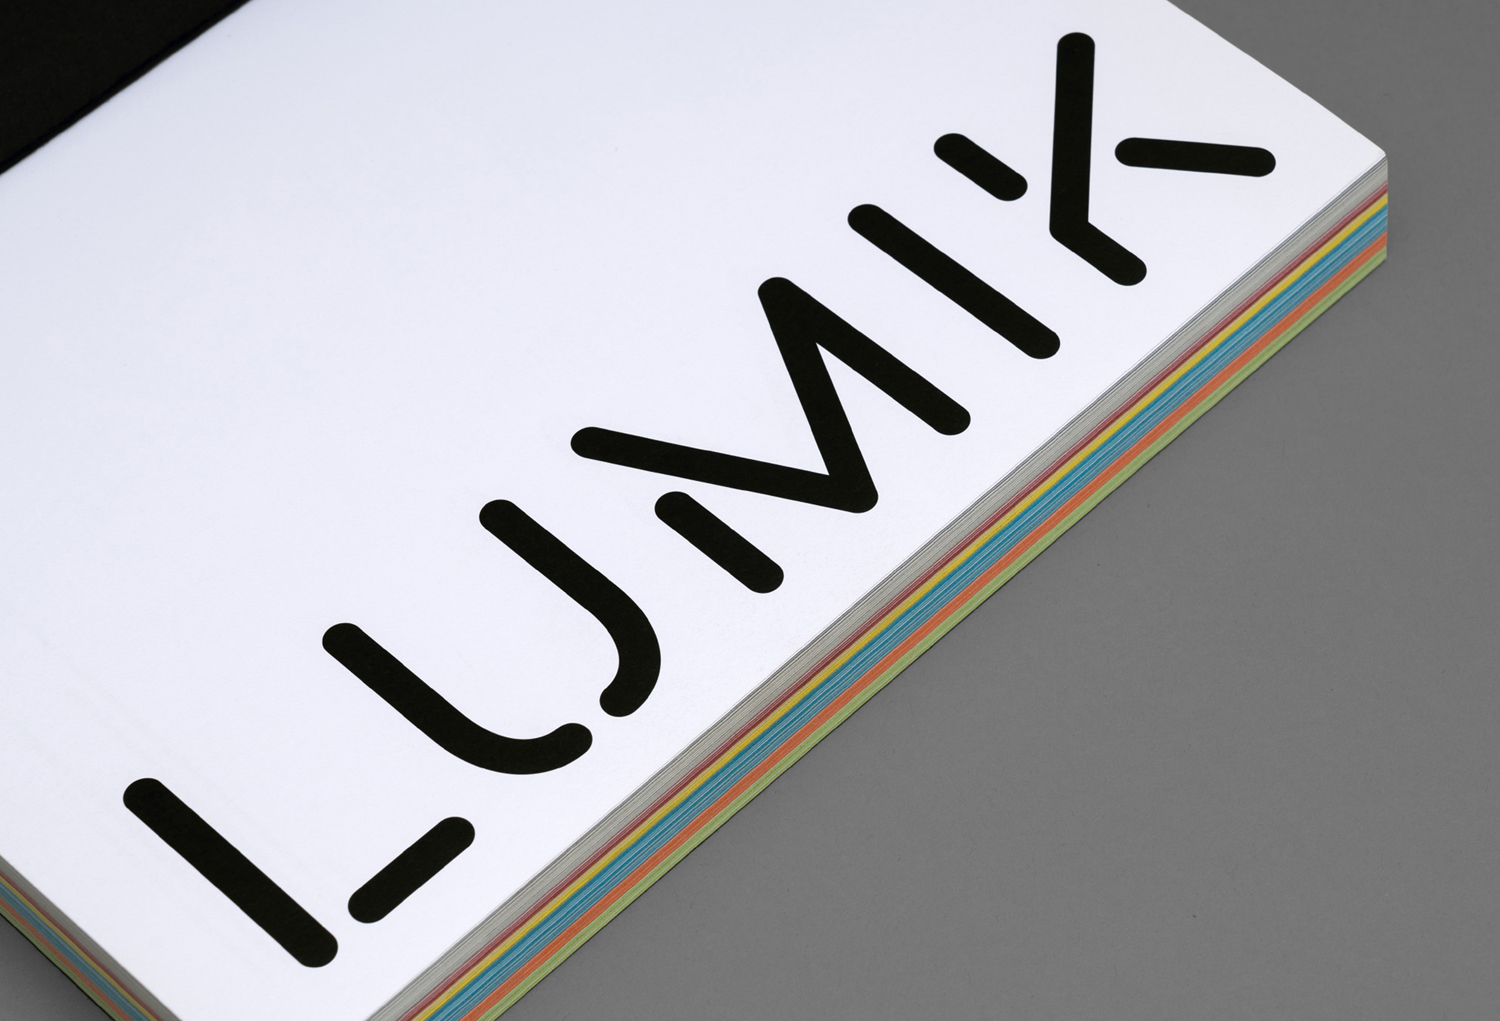 Logotype and brochure design by Hey for Spanish lighting design and manufacturing company Lumik